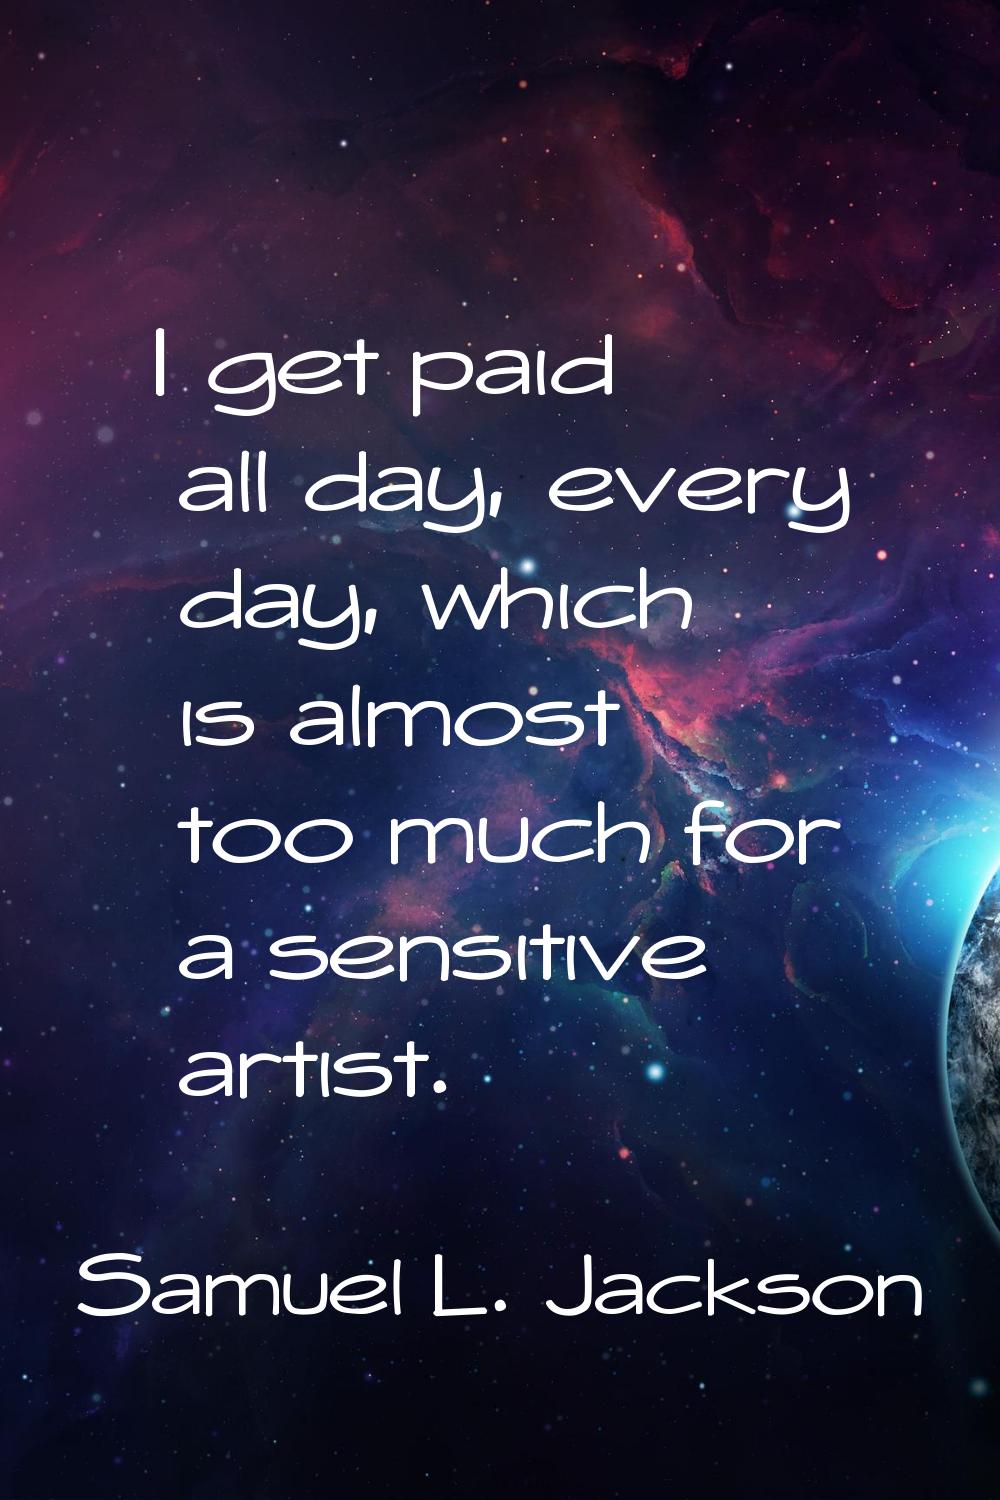 I get paid all day, every day, which is almost too much for a sensitive artist.